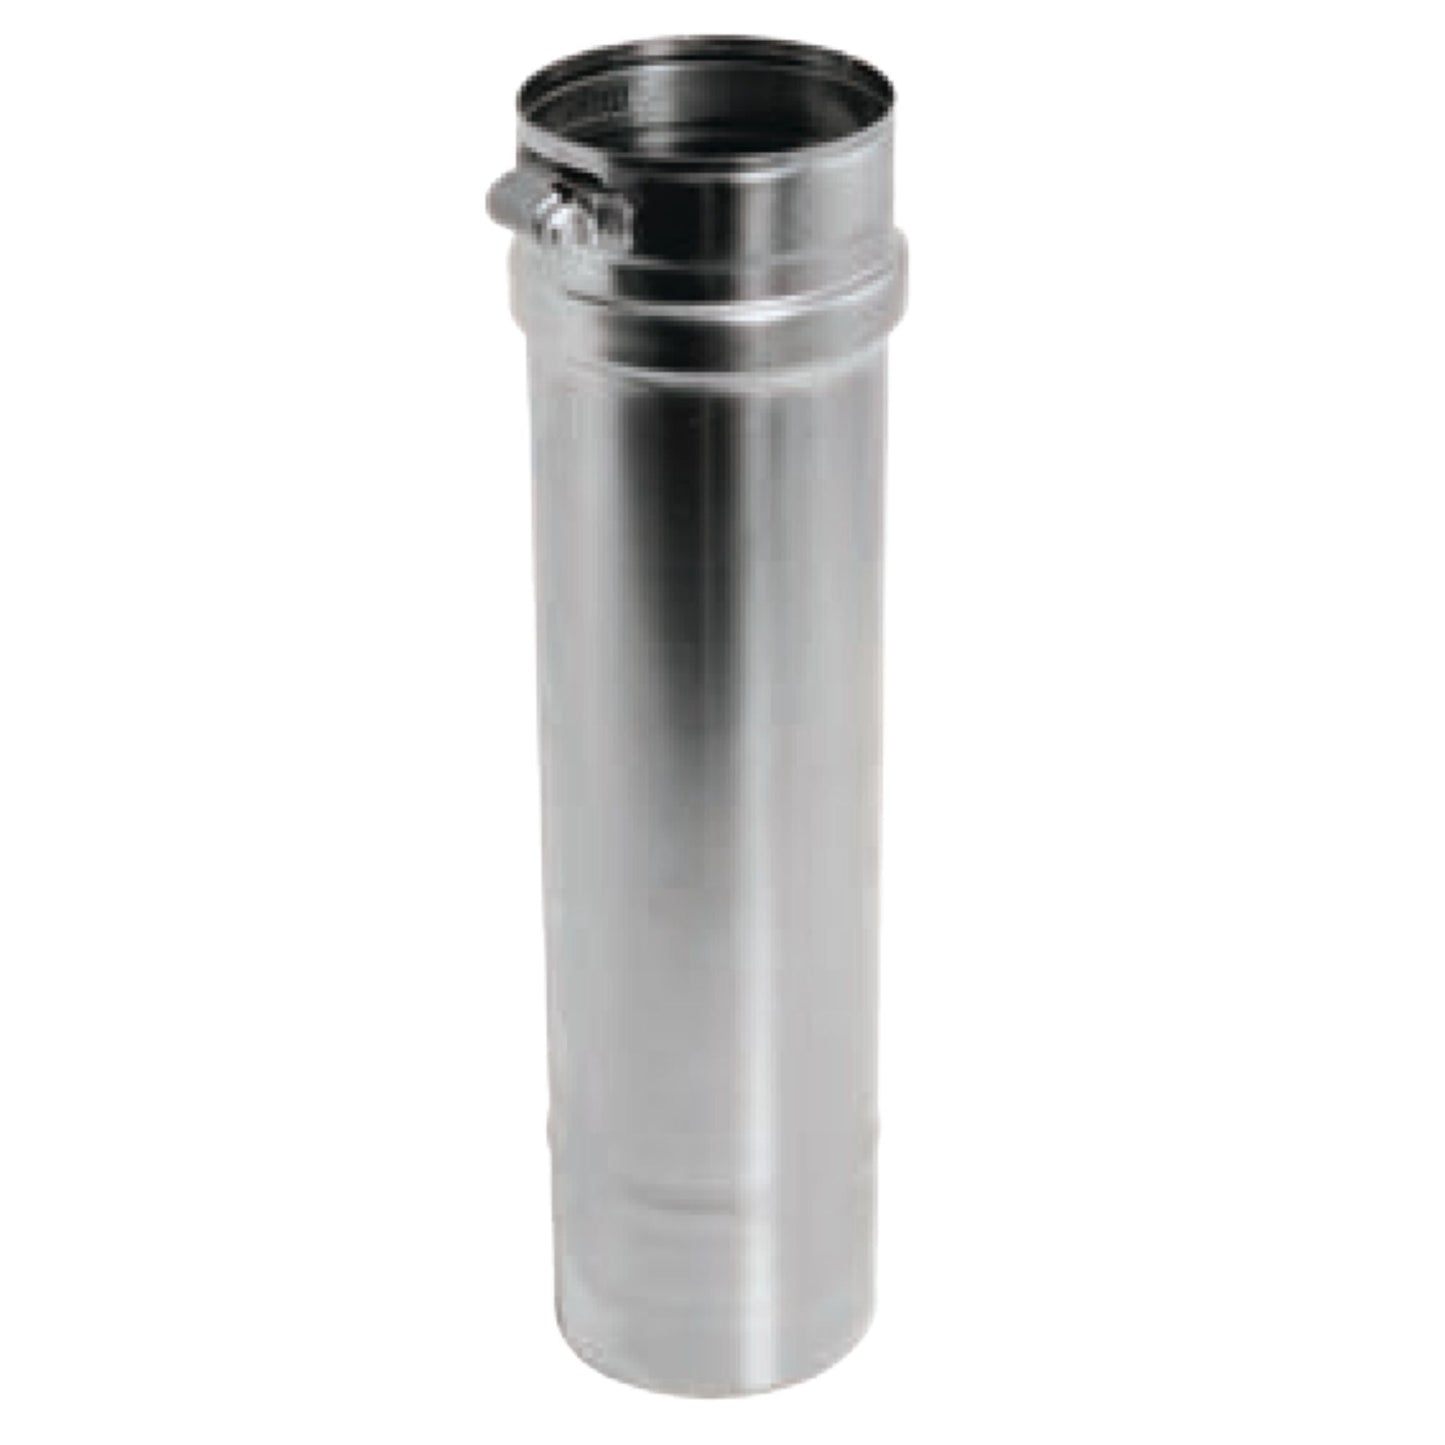 DuraVent FasNSeal 10" x 6" 29-4C Stainless Steel Vent Length